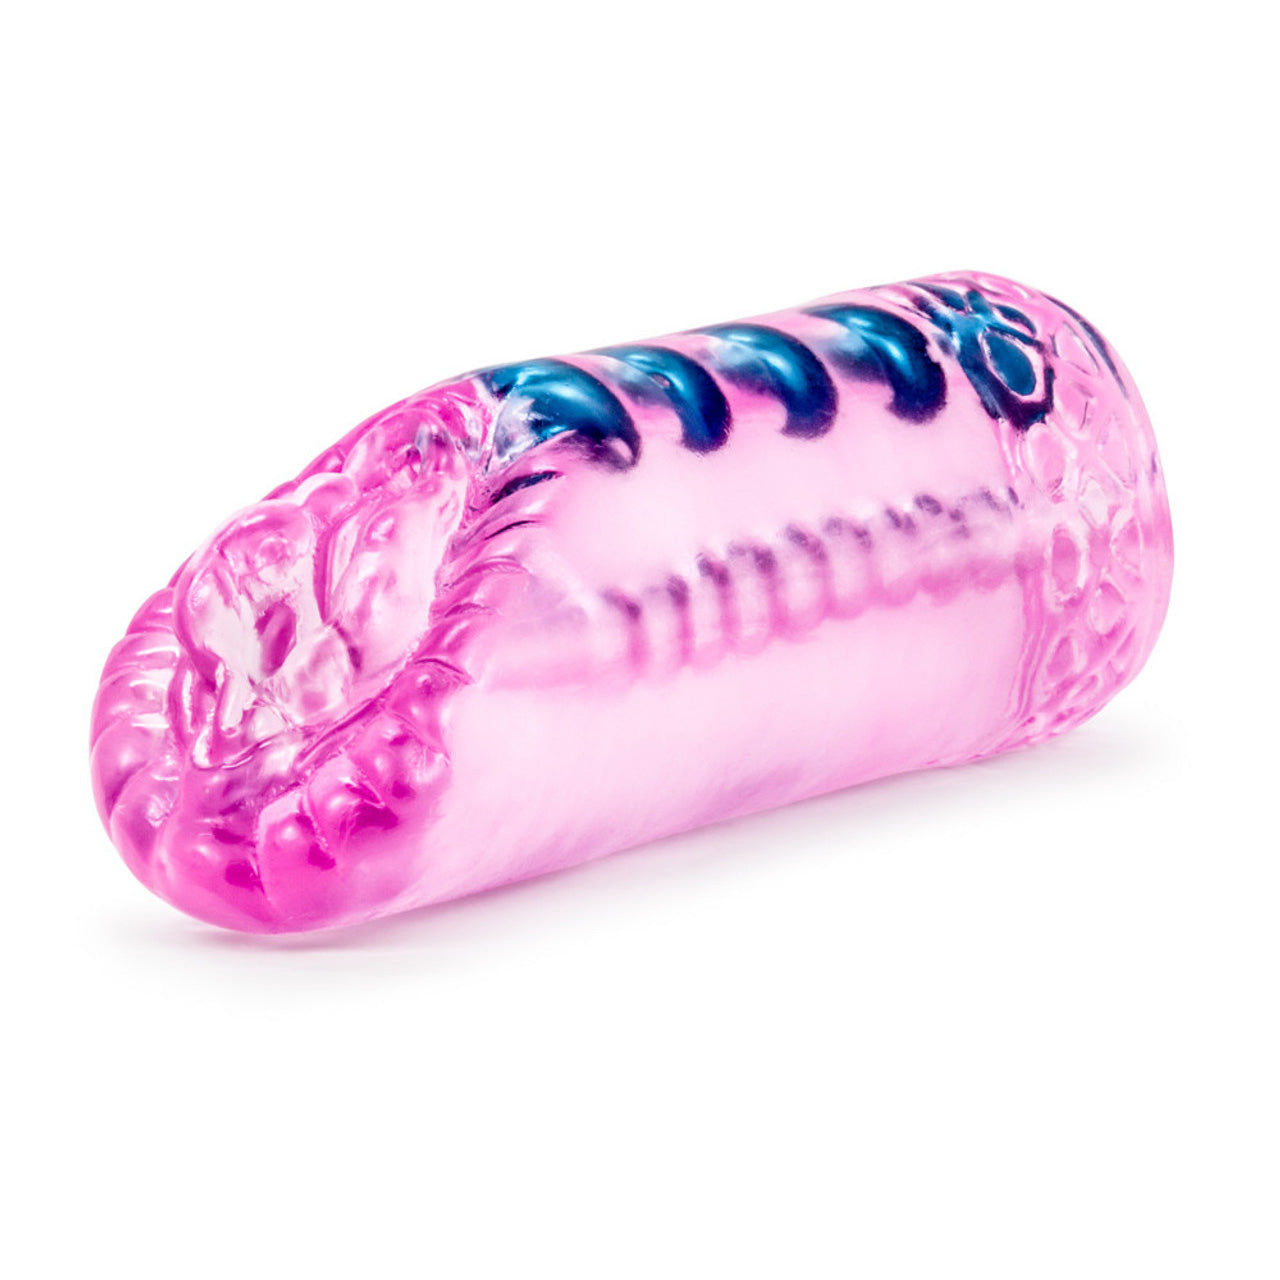 M for Men - Sexy Snatch - Pink - Thorn & Feather Sex Toy Canada